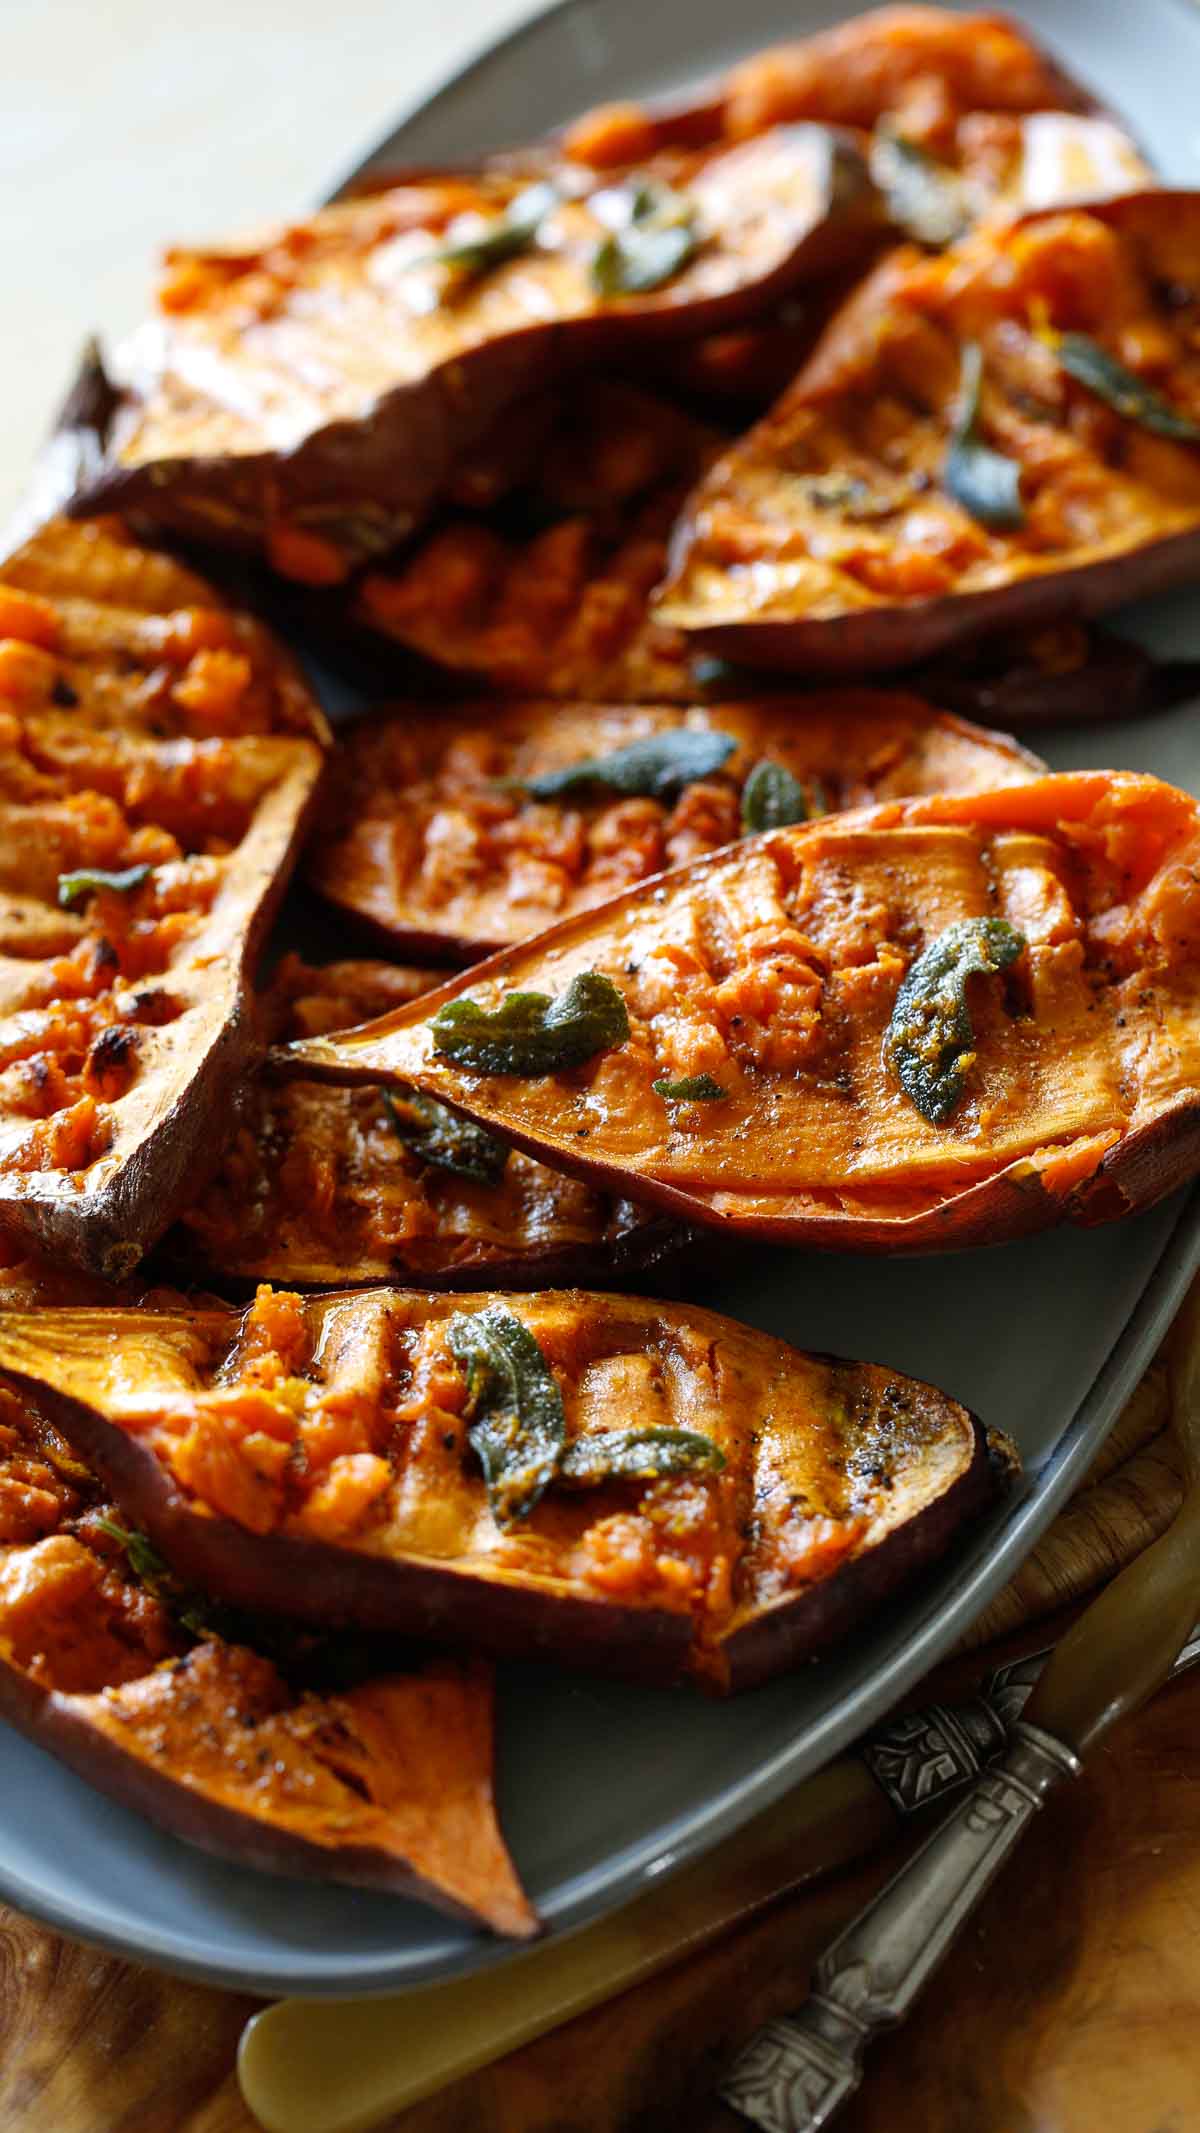 Sweet Potato halves that have been smashed and baked on a platter